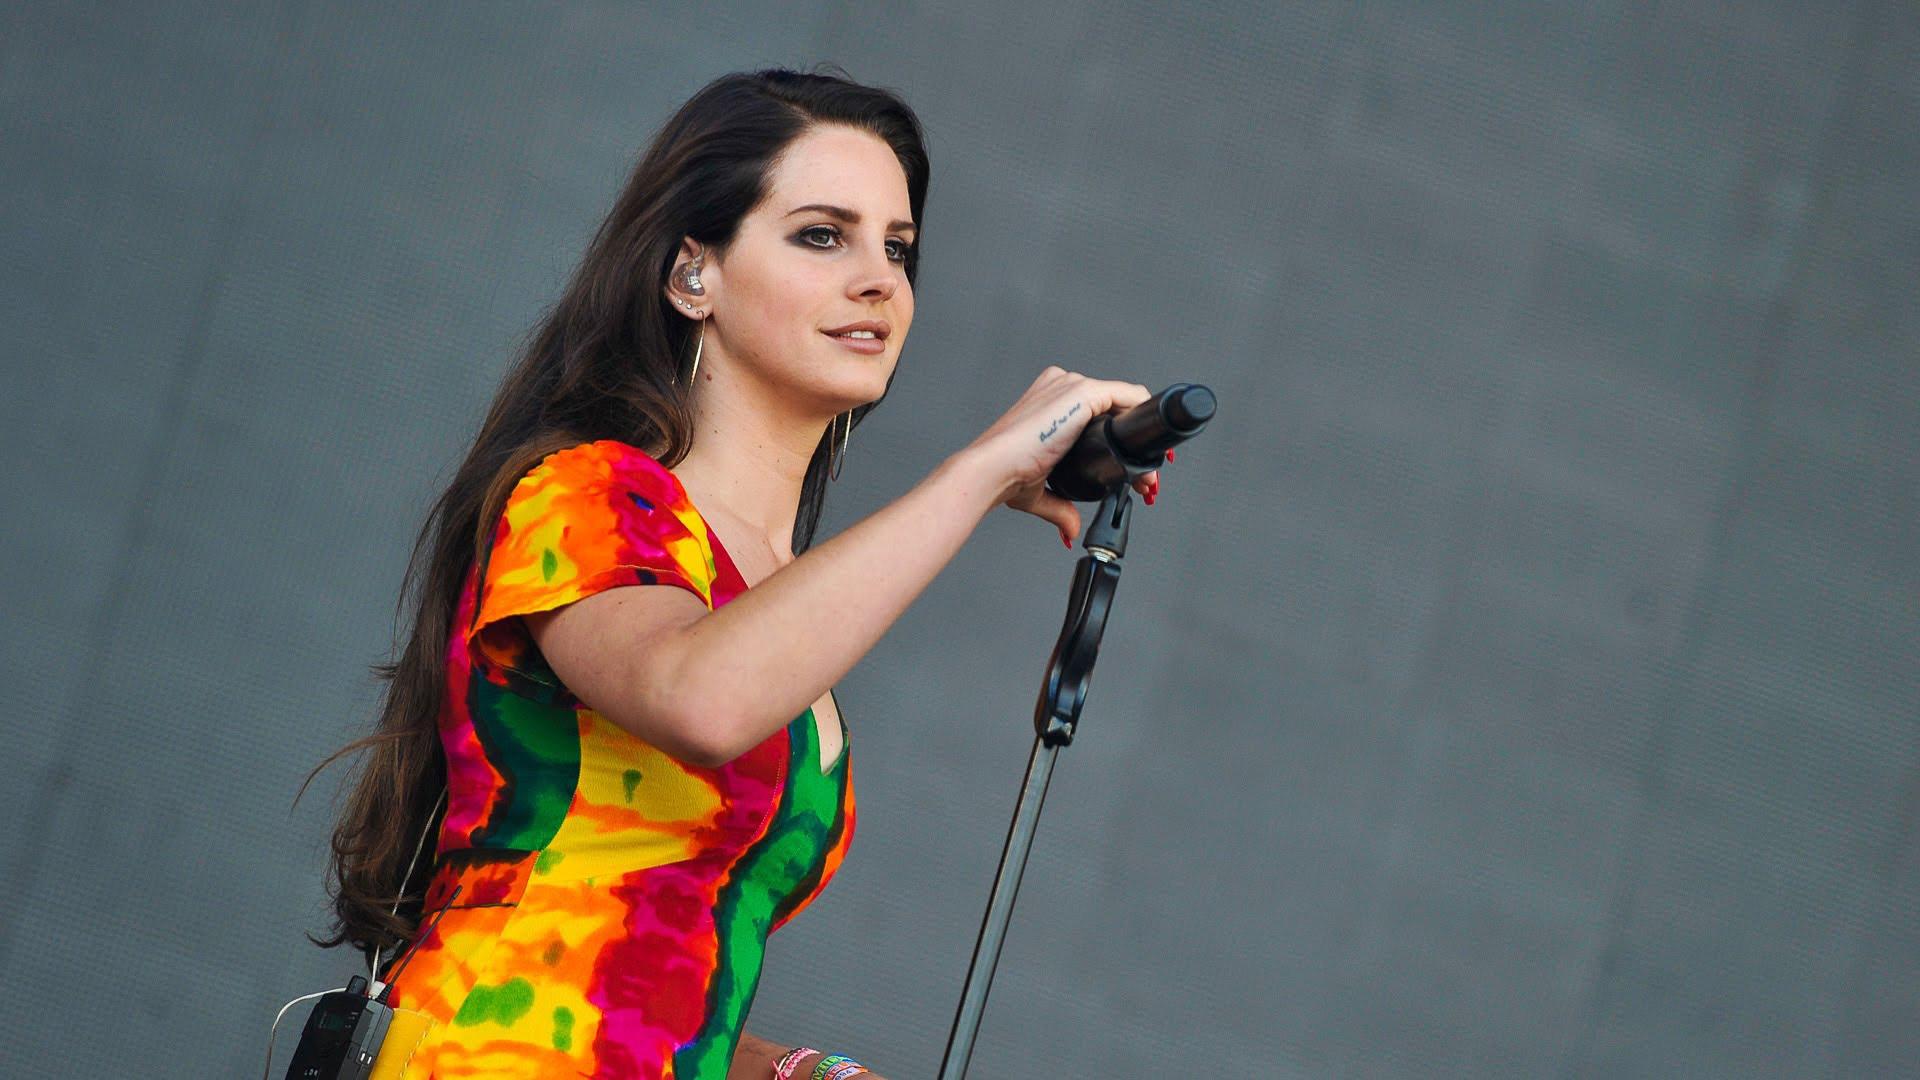 55+ Hot Pictures Of Lana Del Rey Are Heaven On Earth | Best Of Comic Books